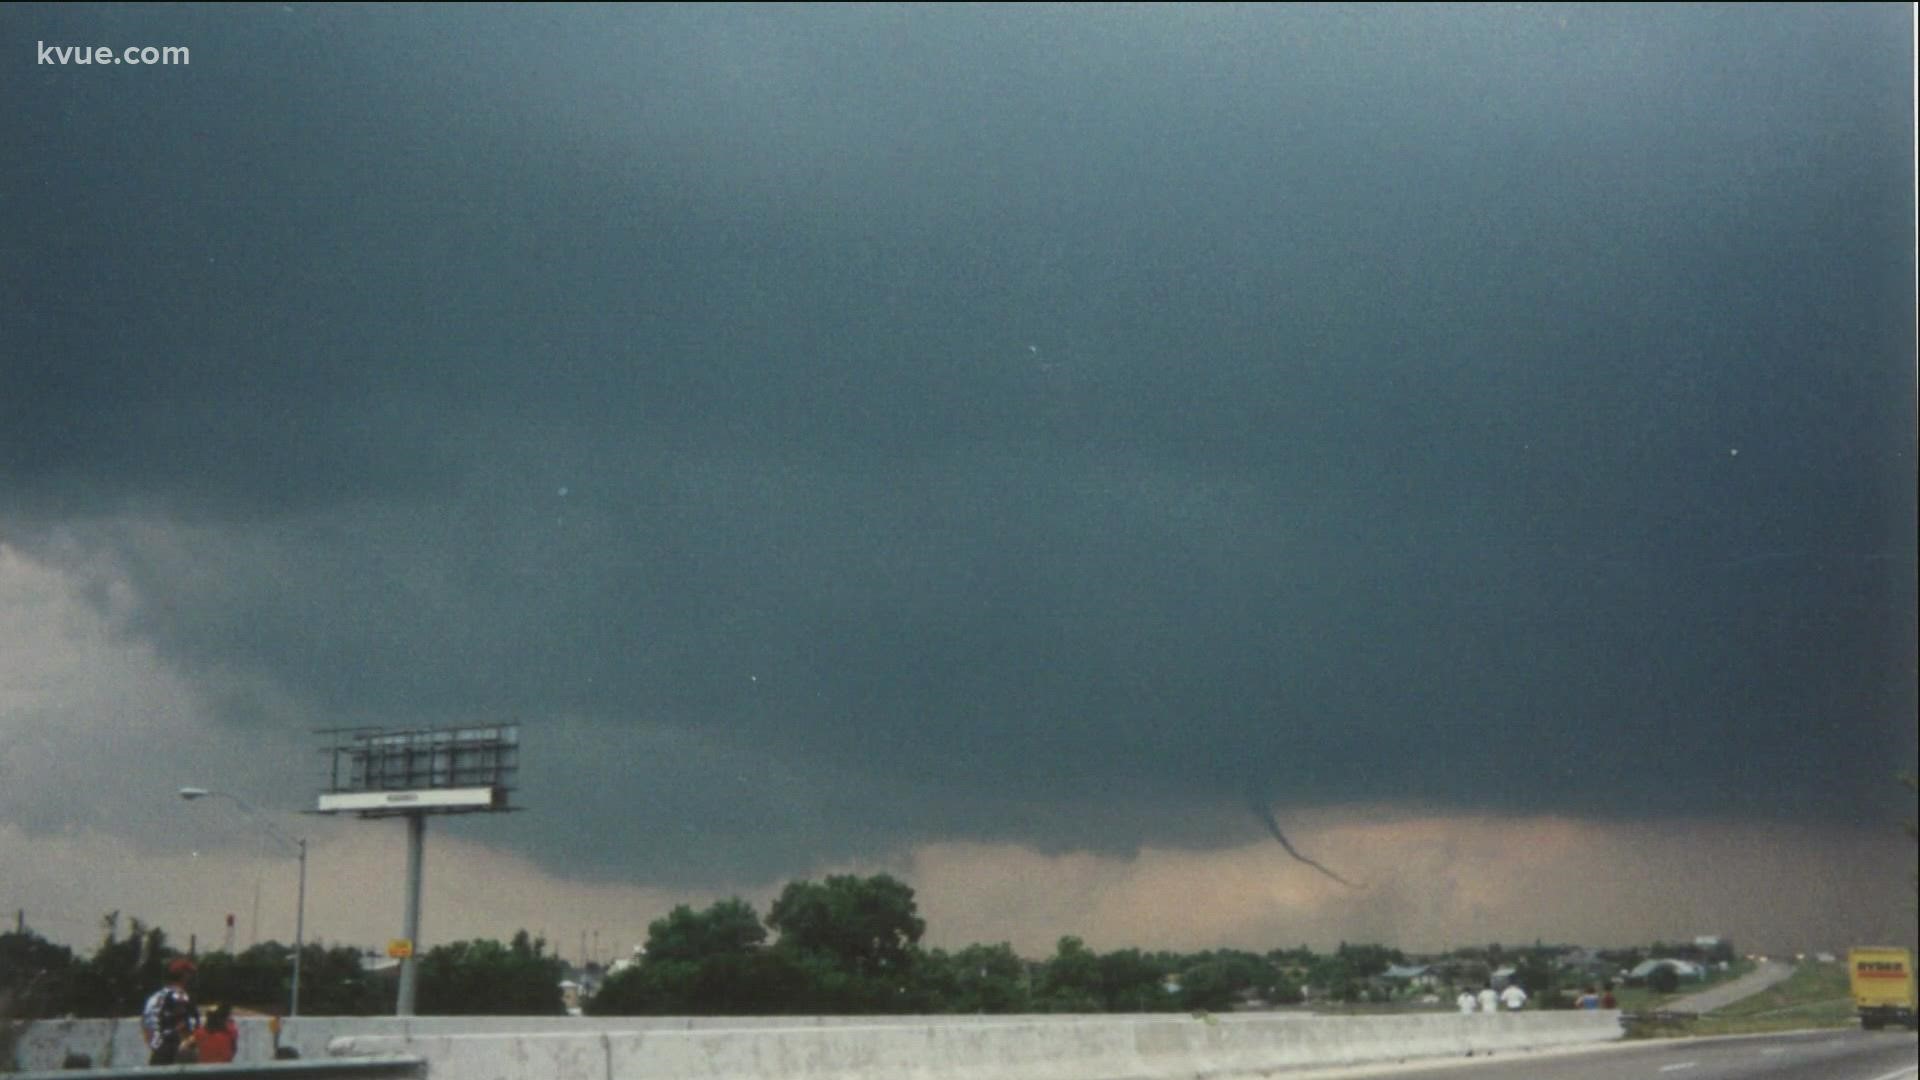 On May 27, 1997, the town of Jarrell, Texas, was rocked by an F-5 tornado. We returned to the site with a Texan who captured the storm on camera.